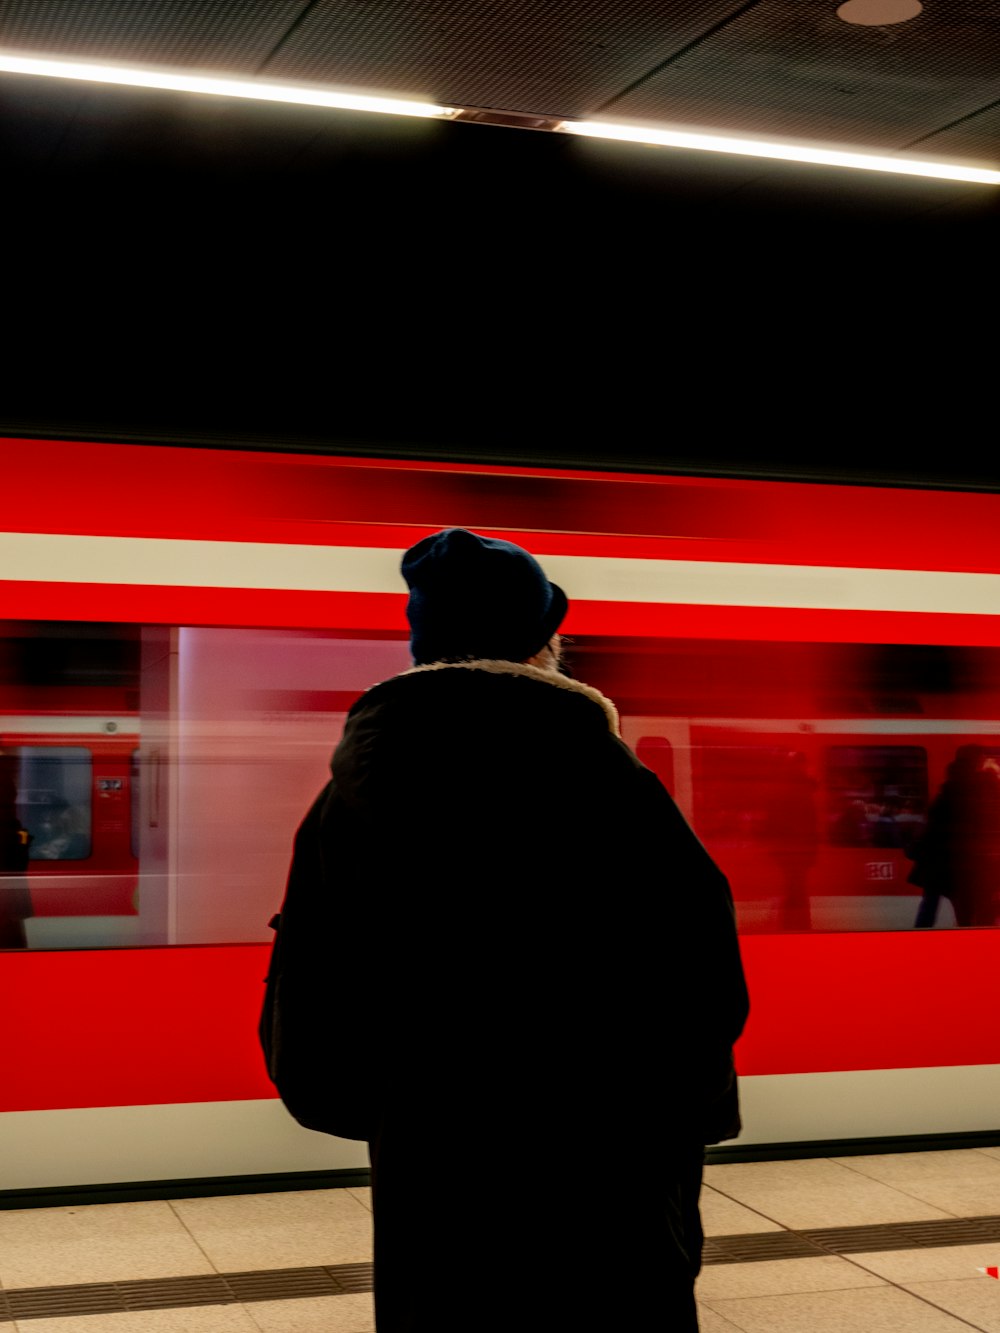 a person standing in front of a red train